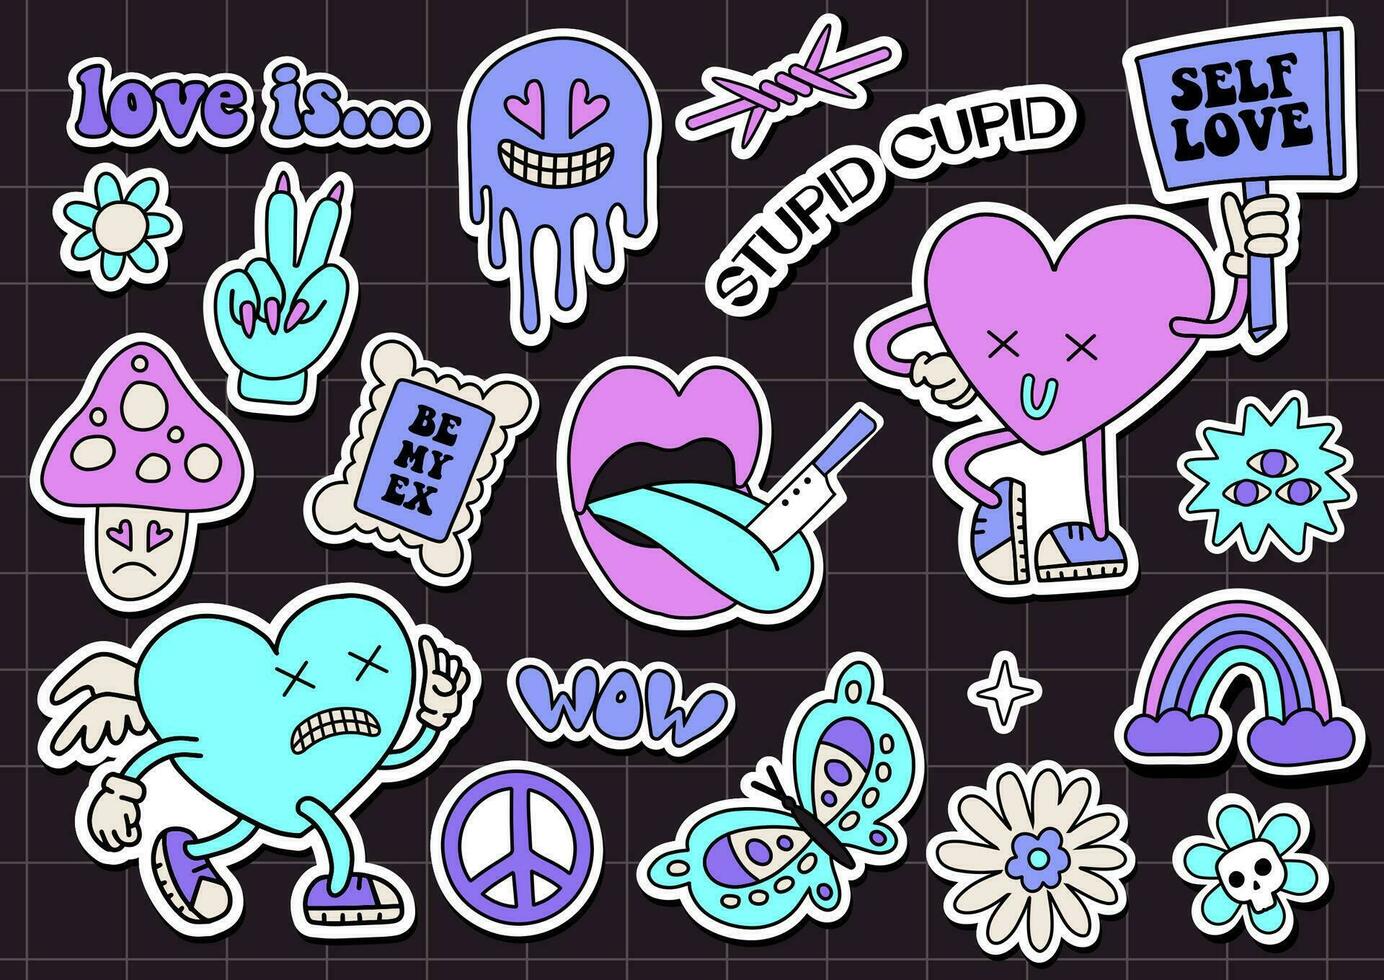 Anti valentines day concept. Sticker pack of retro cartoon heart characters and elements. Big set of comic stickers in psychedelic weird groovy style. Trendy neon 2000s style. Vector illustration.